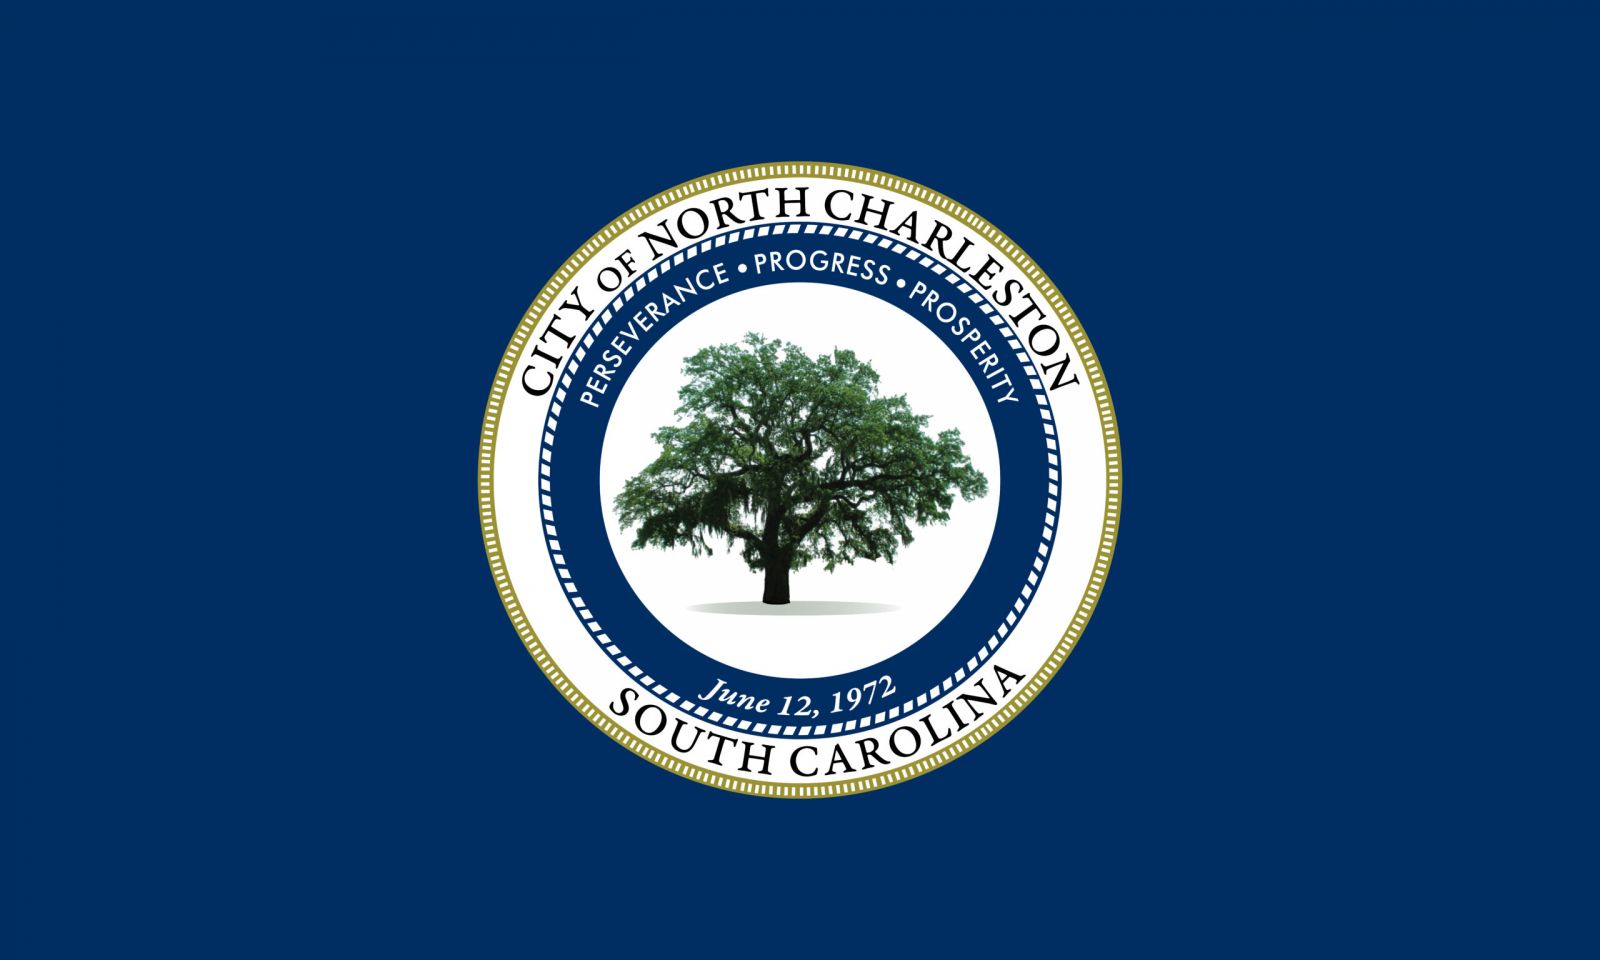 North Charleston's current flag is too complex, says Mayor Keith Summey. (Image/Provided)